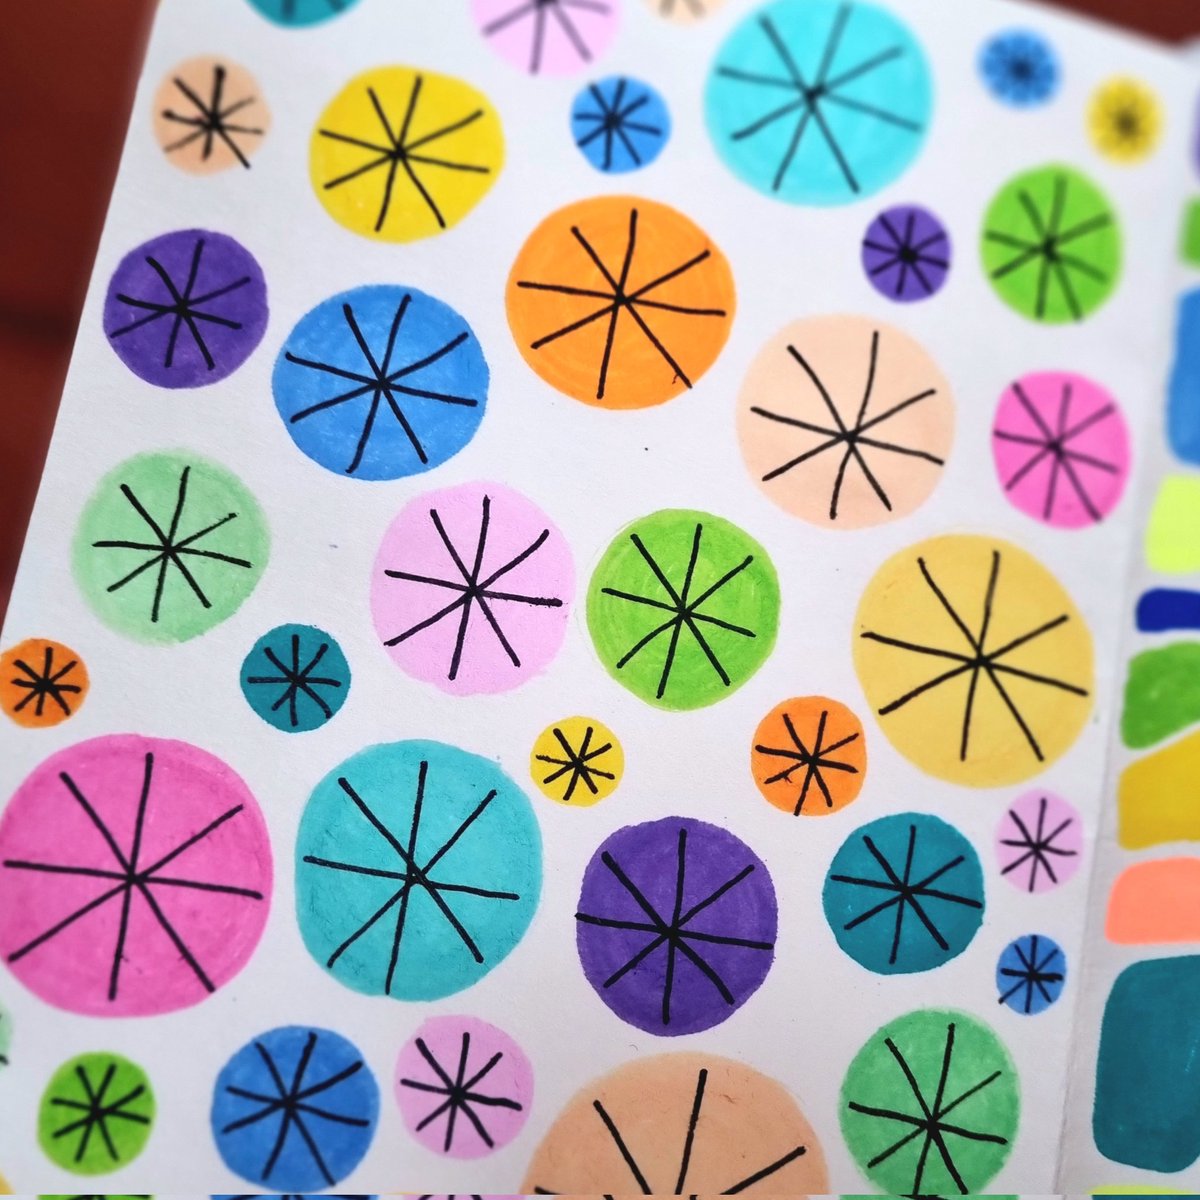 Happy Friday everyone!

#pattern #sketchbookpages #sketchbook #colourfulpatterns #Friday #sketchbook